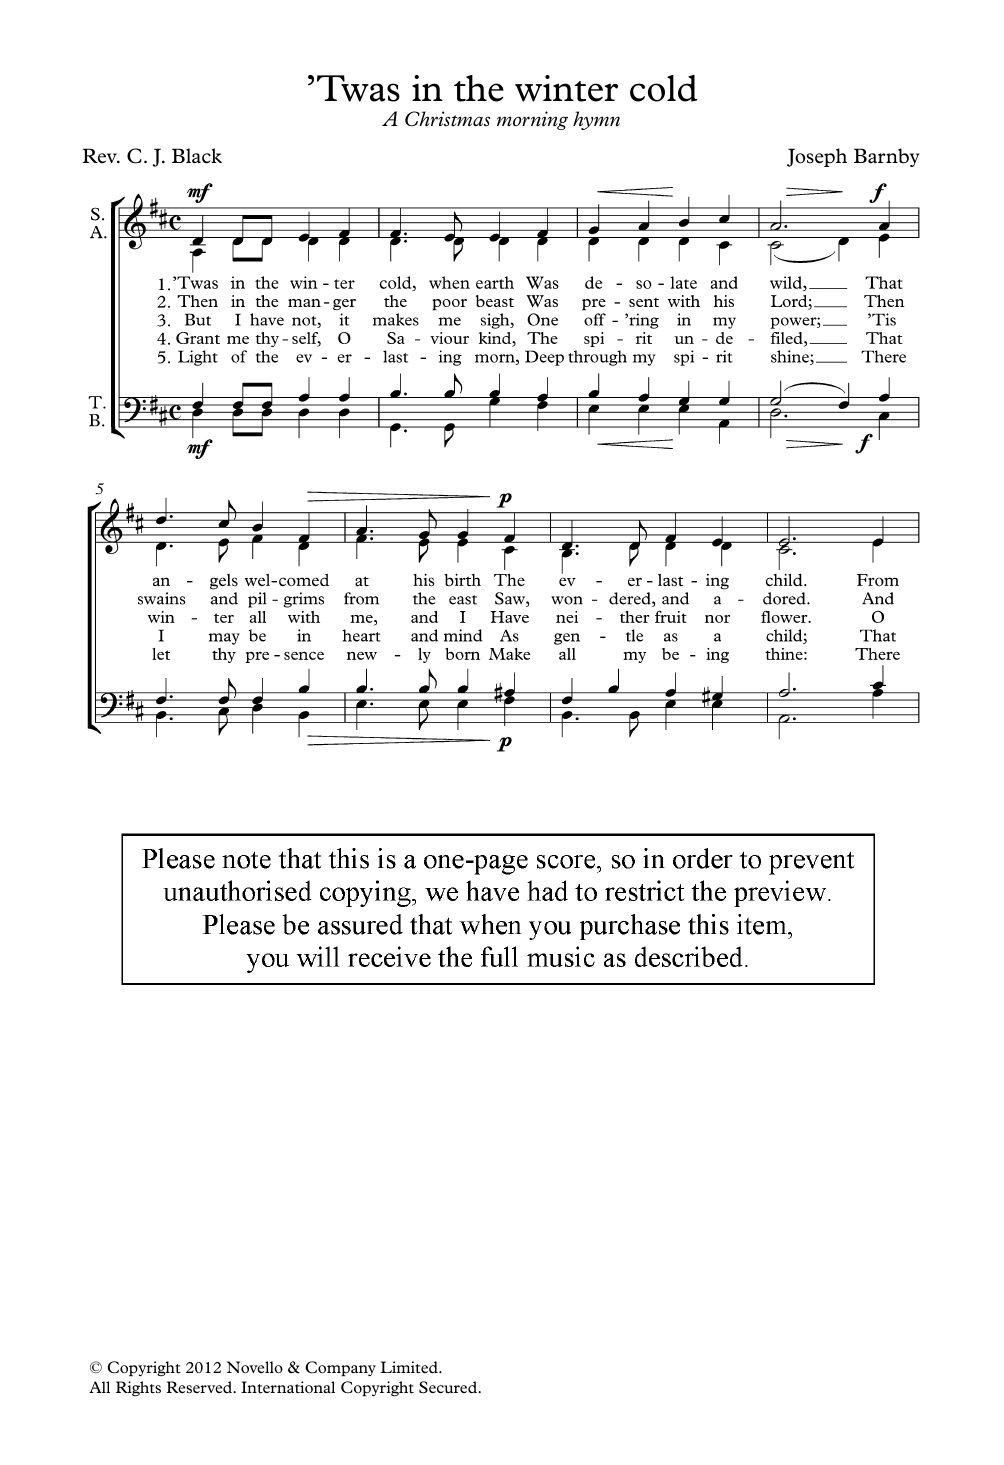 Joseph Barnby 'Twas In The Winter Cold sheet music notes printable PDF score